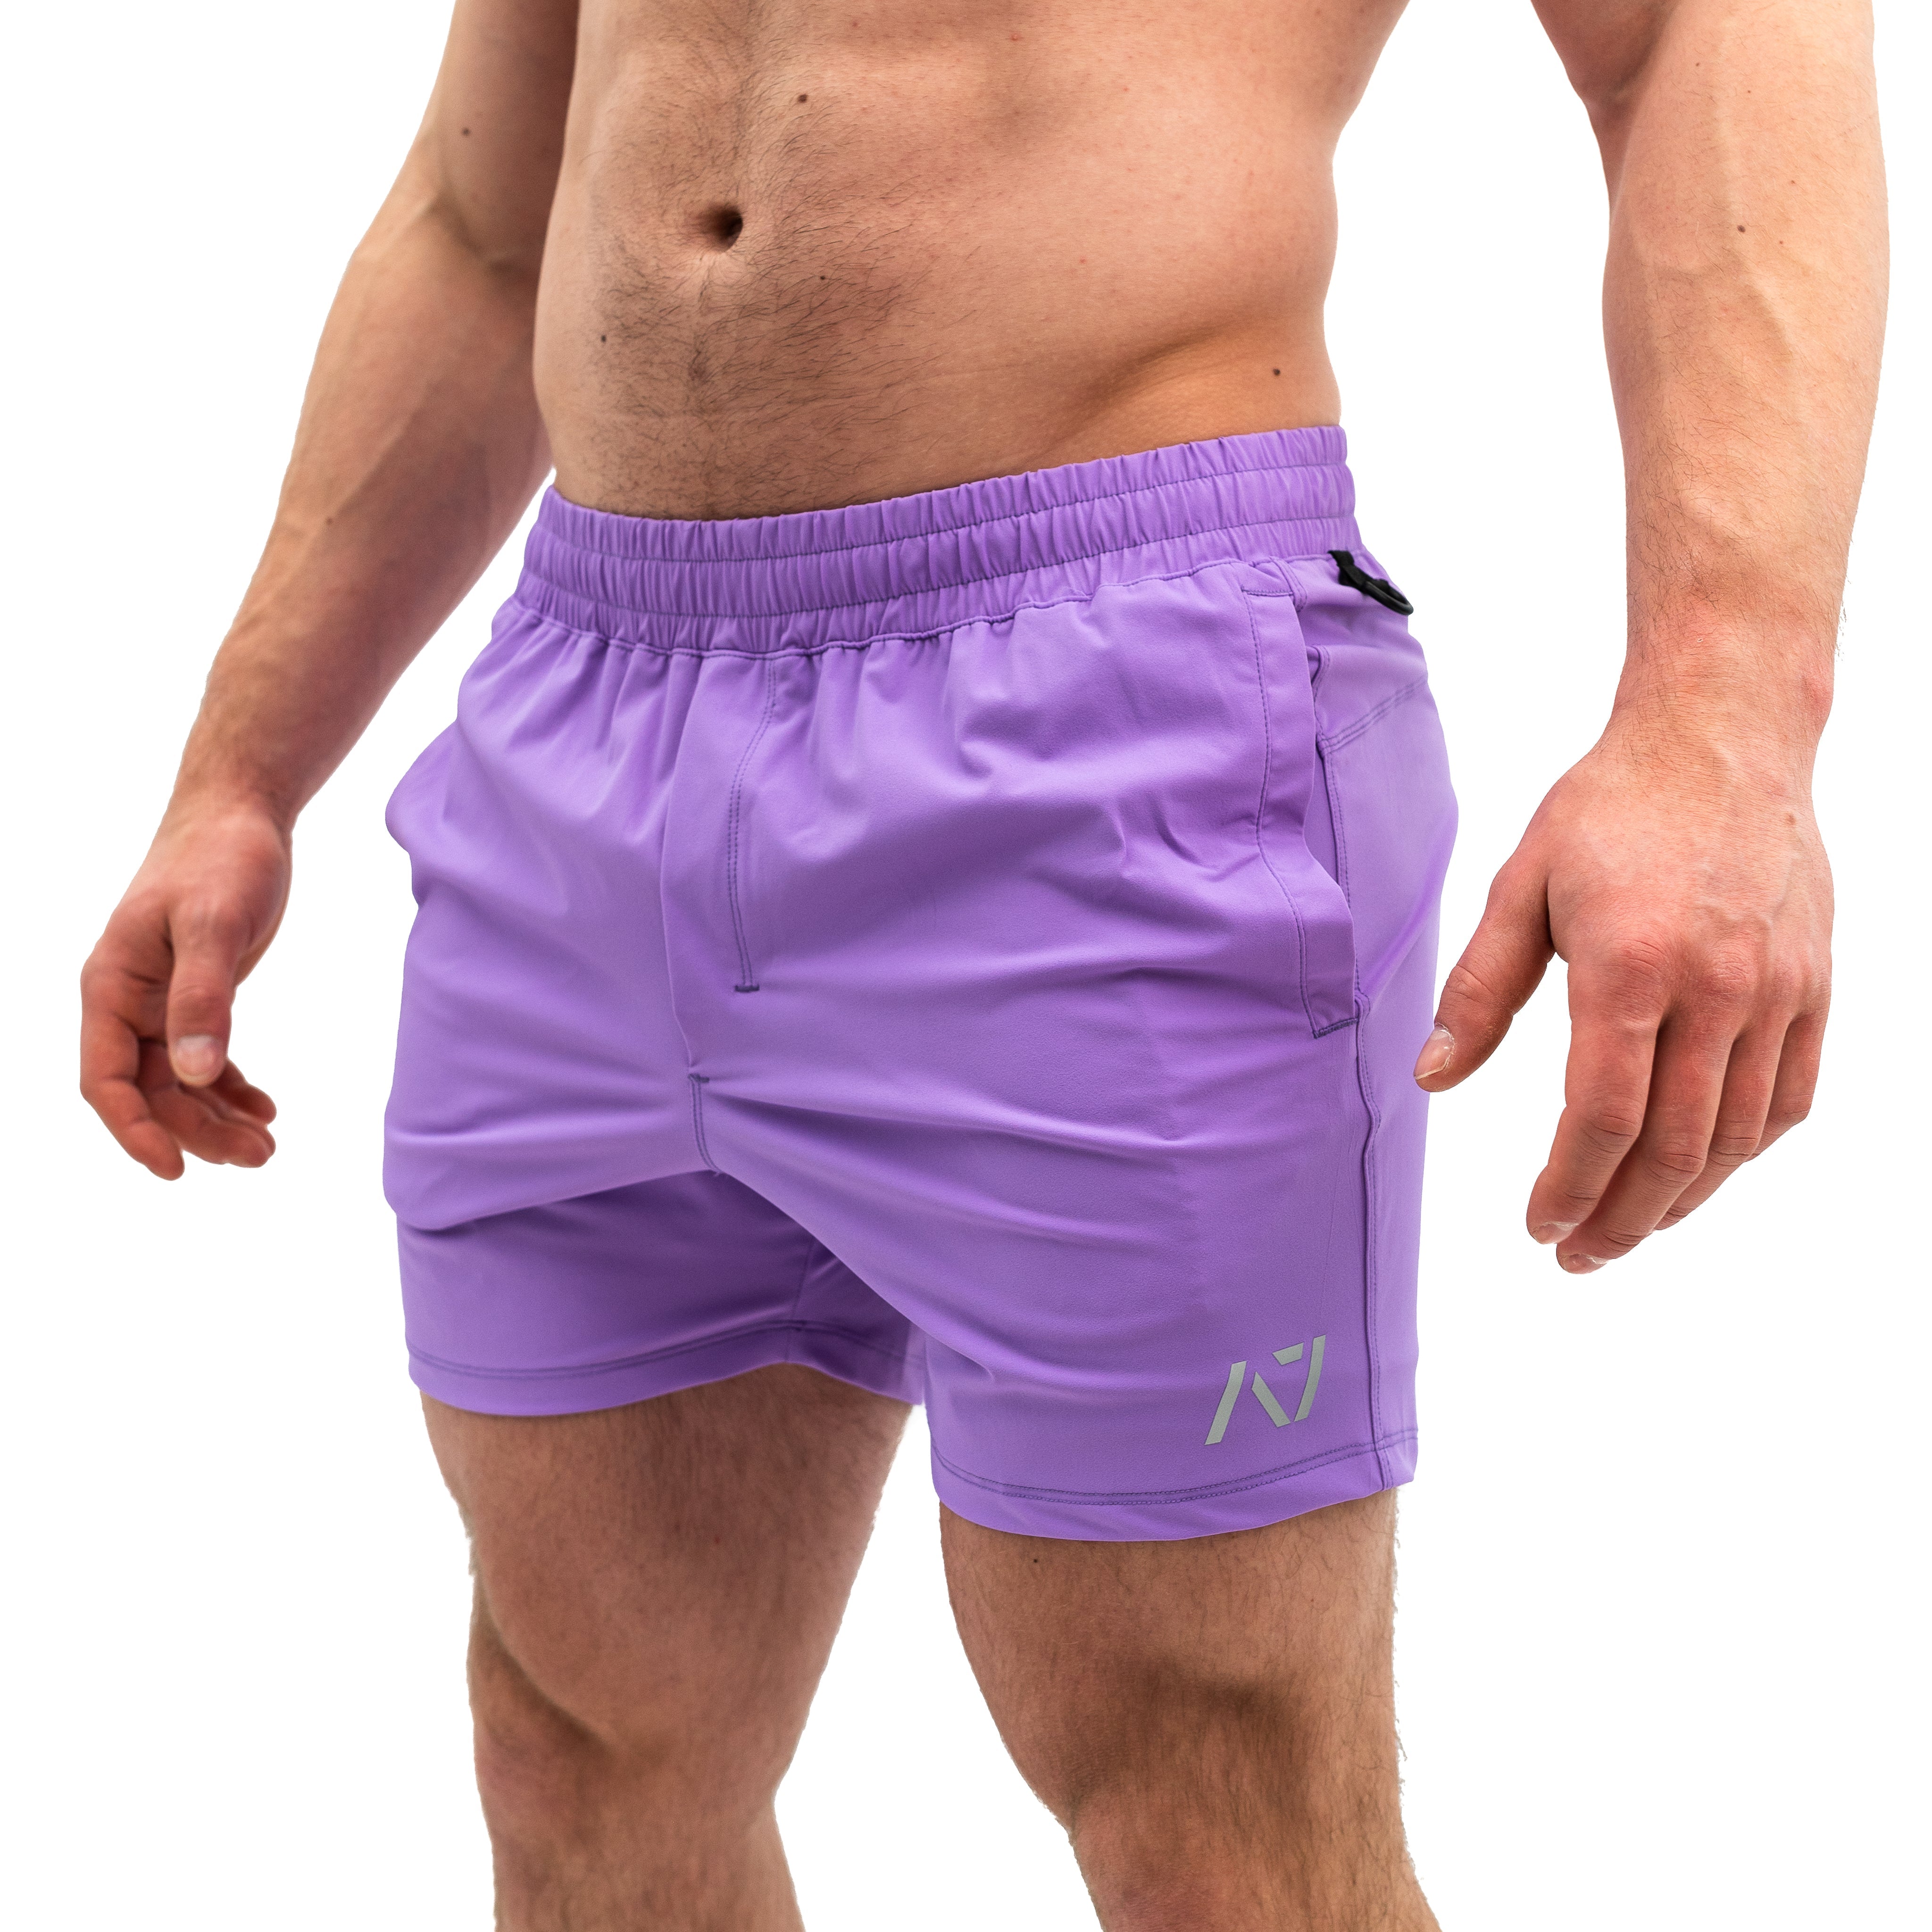 Lilac Dream 360-GO KWD shorts were created to provide the flexibility for all the movements in your training while offering the comfort and fit you have come to love through our KWD shorts. Purchase 360-GO KWD shorts from A7 UK and A7 Europe. 360-GO KWD shorts are perfect for powerlifting and weightlifting training. Available in UK and Europe including France, Italy, Germany, the Netherlands, Sweden and Poland.